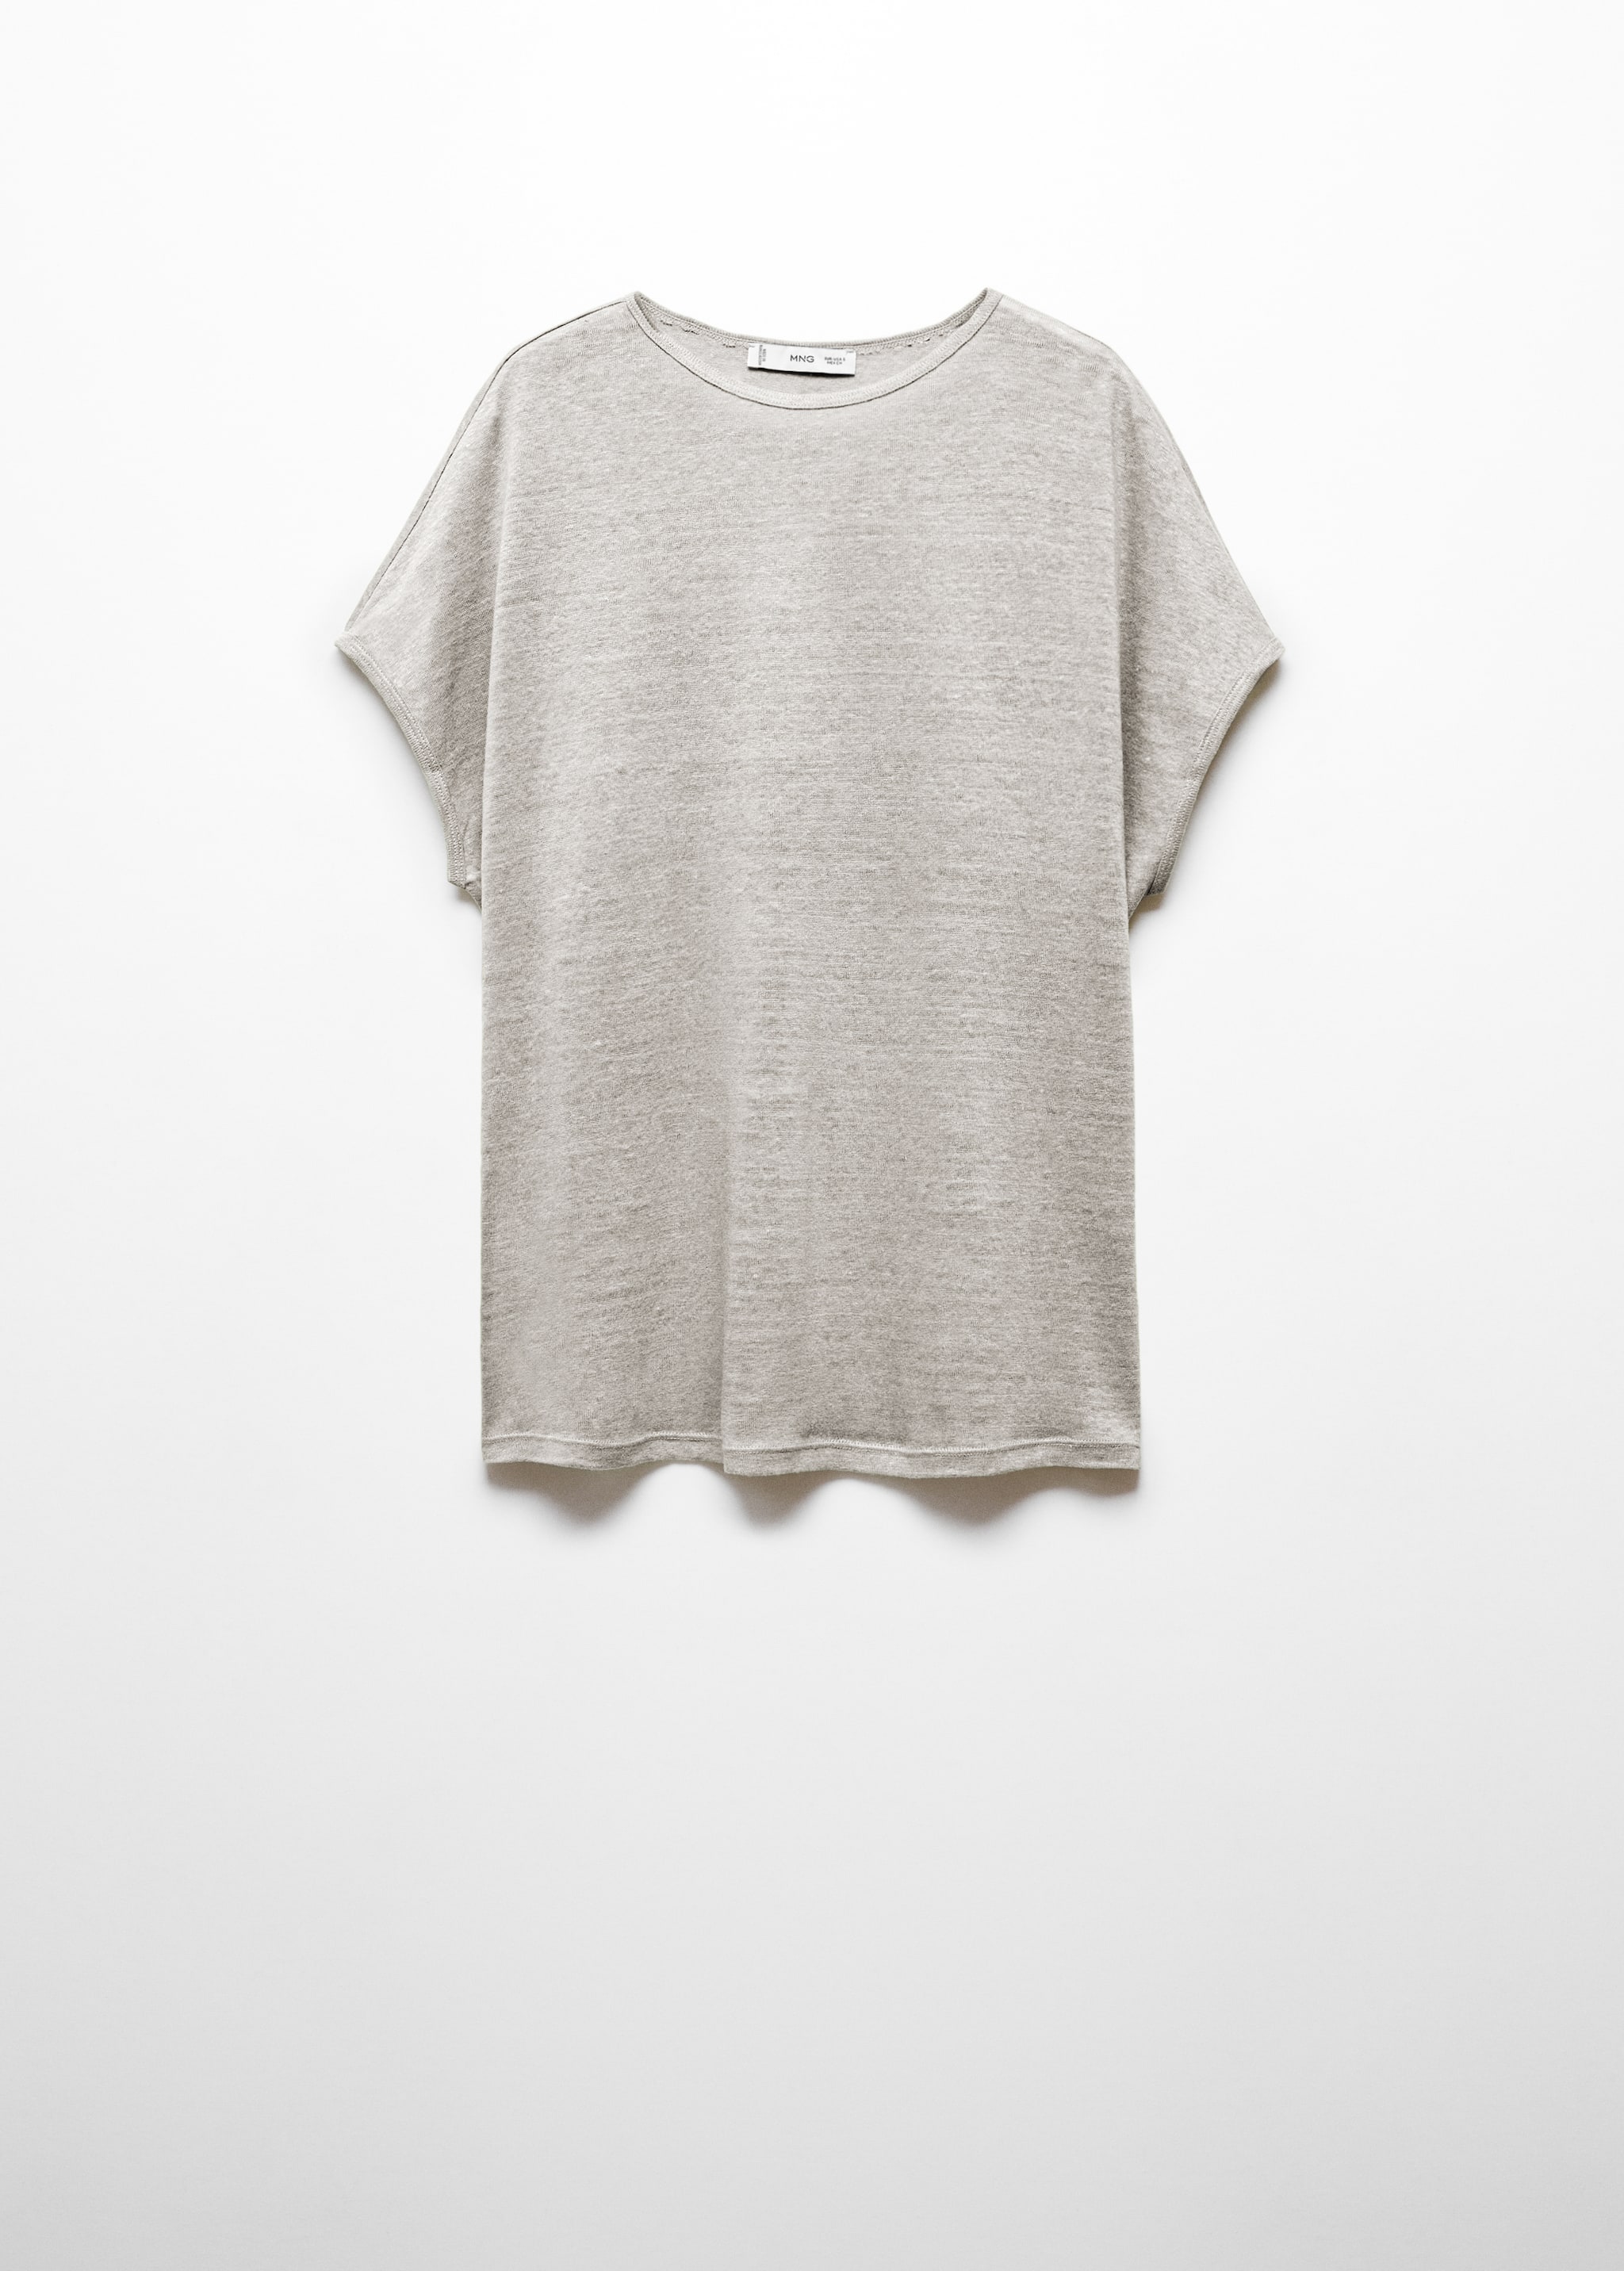 100% linen t-shirt - Article without model